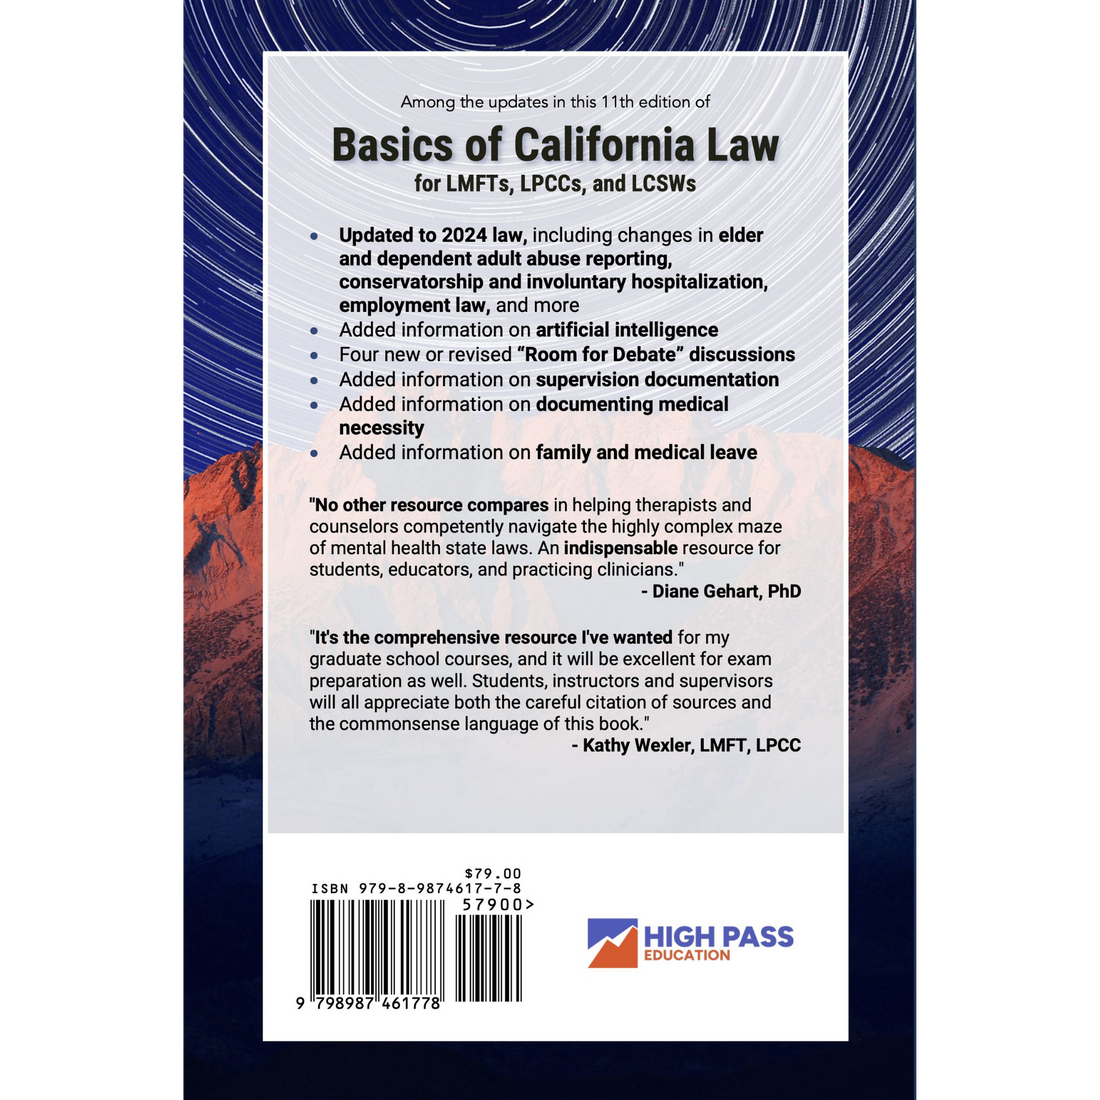 120-day rental - Basics of California Law for LMFTs, LPCCs, and LCSWs, 11th ed digital